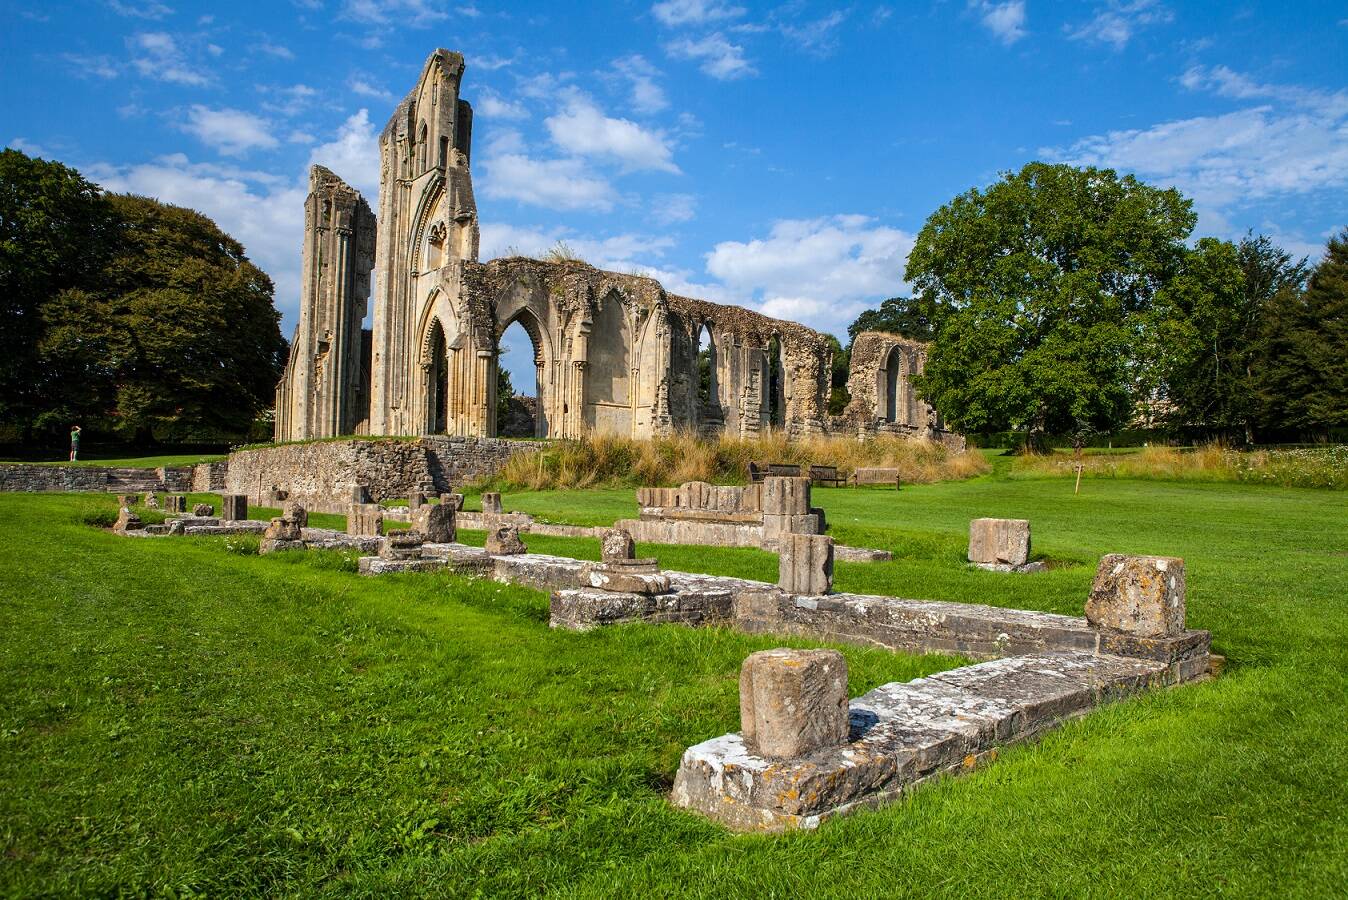 Who is buried at Glastonbury Abbey